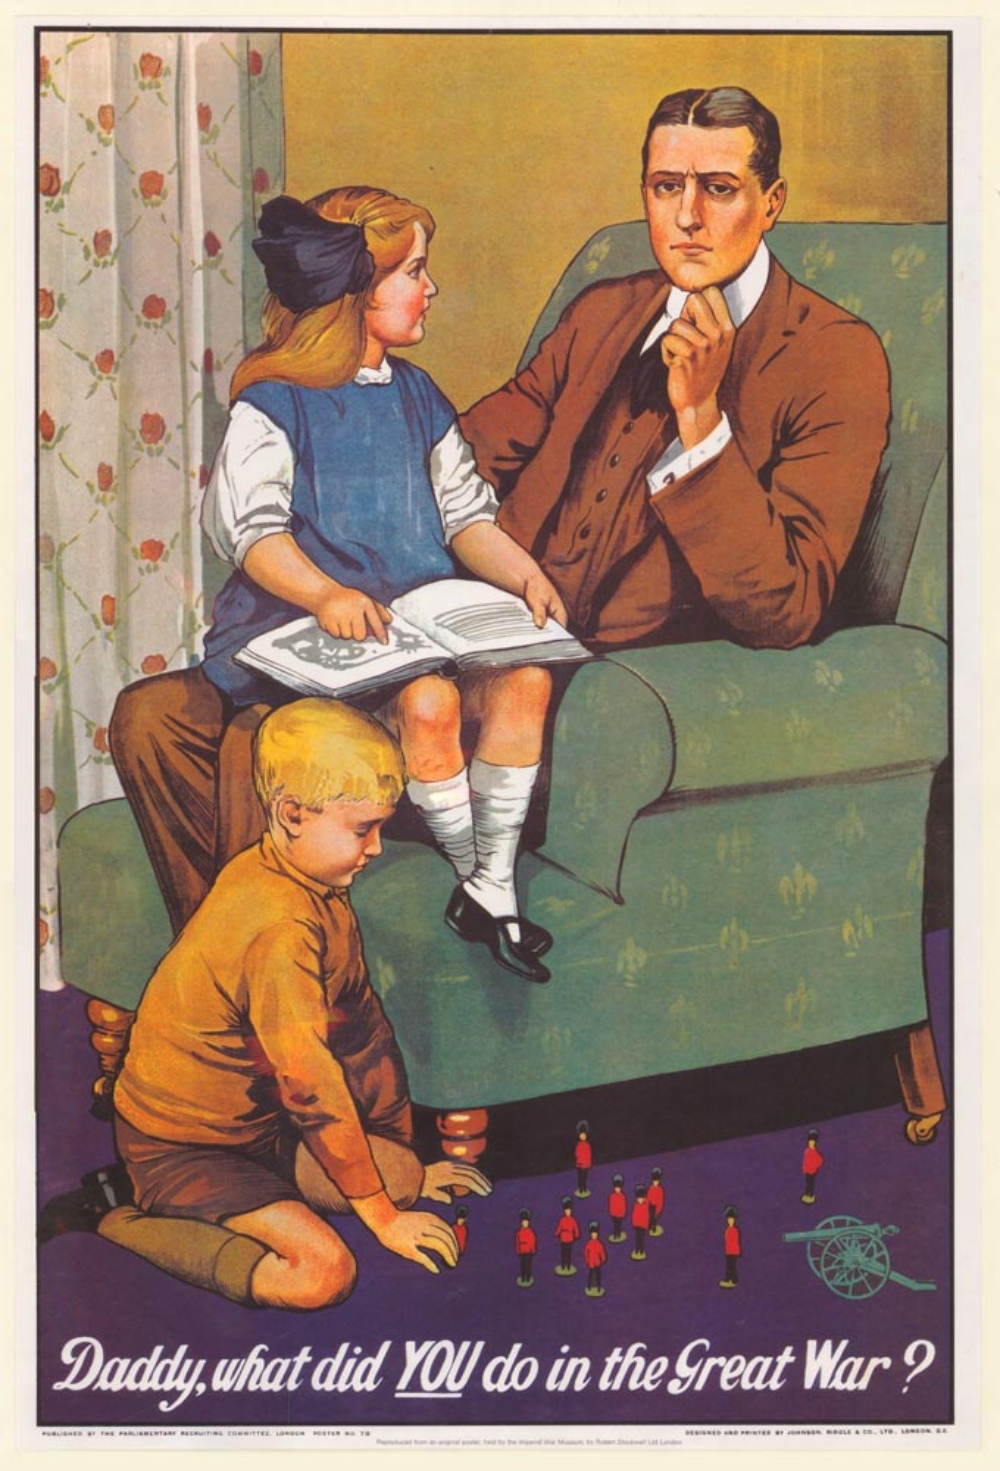 “Daddy, what did you do in the Great War?” poster, no. 79, Parliamentary Recruiting Committee, First World War poster collection